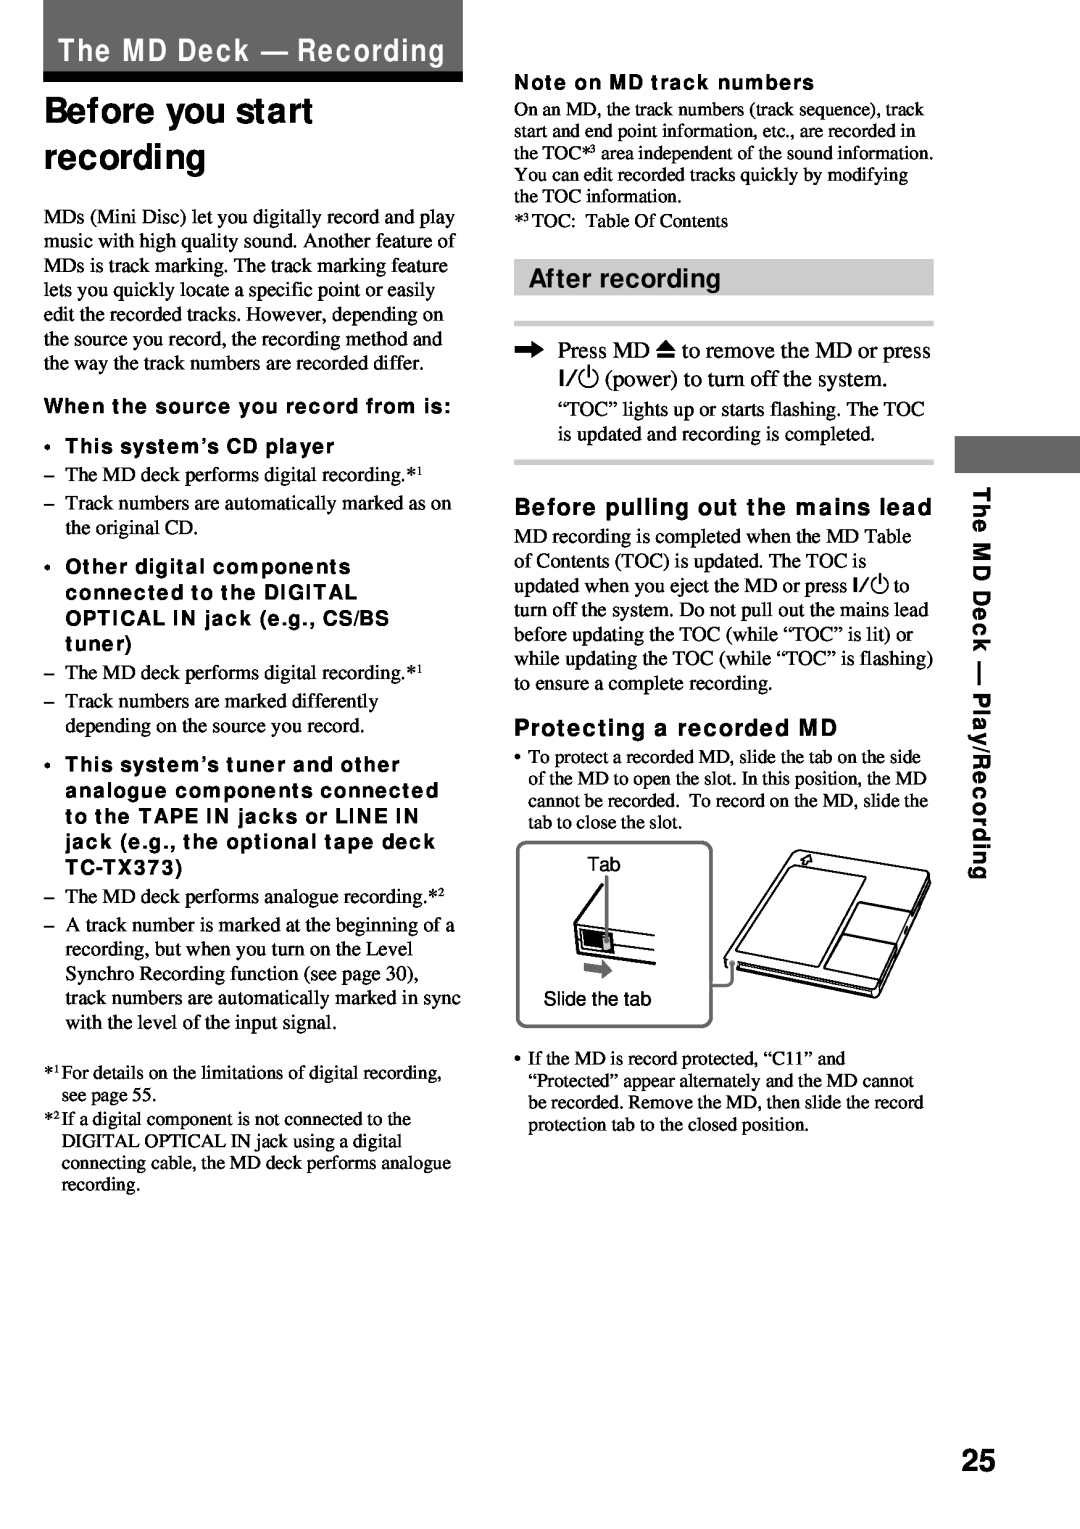 Sony DHC-MD373 manual Before you start recording, The MD Deck - Recording, After recording, Protecting a recorded MD 